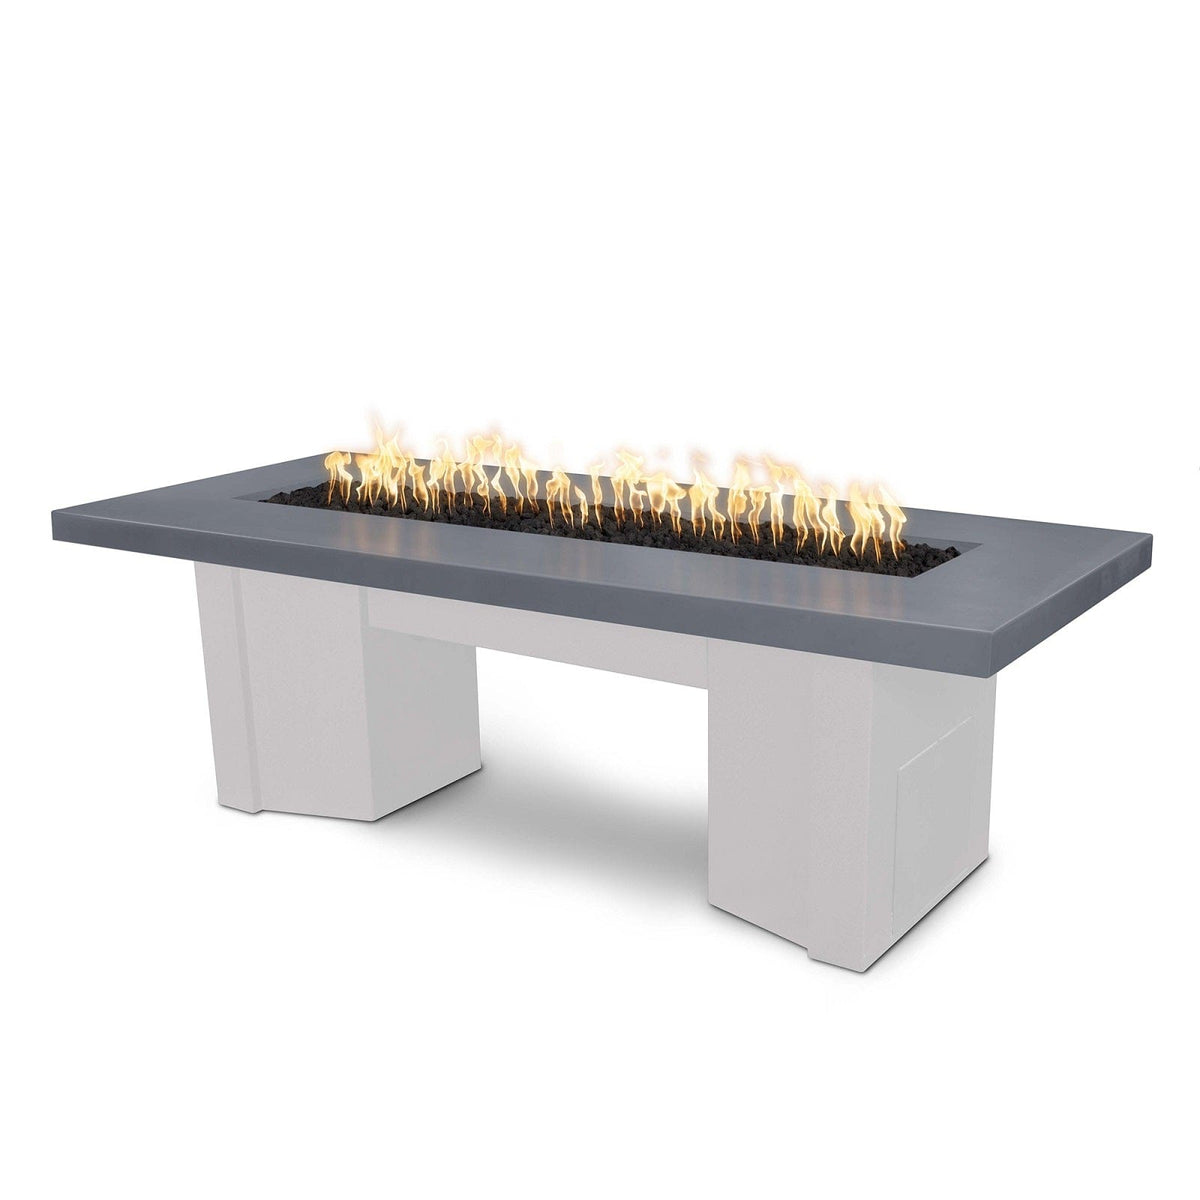 The Outdoor Plus Fire Features Gray (-GRY) / White Powder Coated Steel (-WHT) The Outdoor Plus 60&quot; Alameda Fire Table Smooth Concrete in Liquid Propane - Match Lit with Flame Sense System / OPT-ALMGFRC60FSML-LP